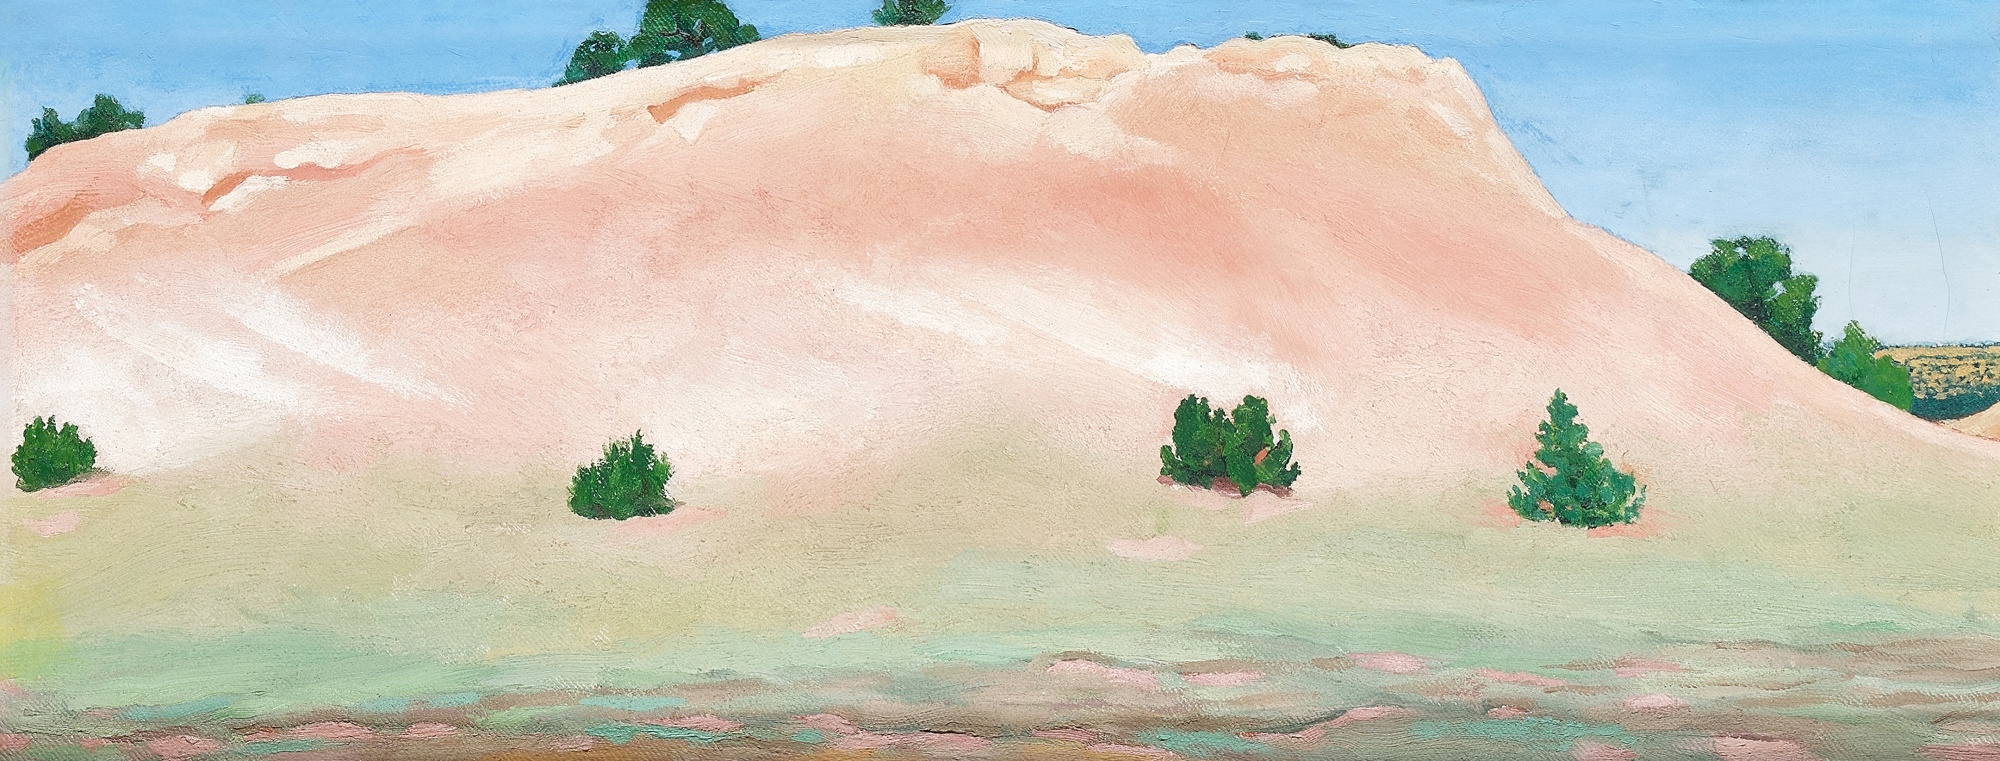 Long Pink Hill by Georgia O'Keeffe, 1940